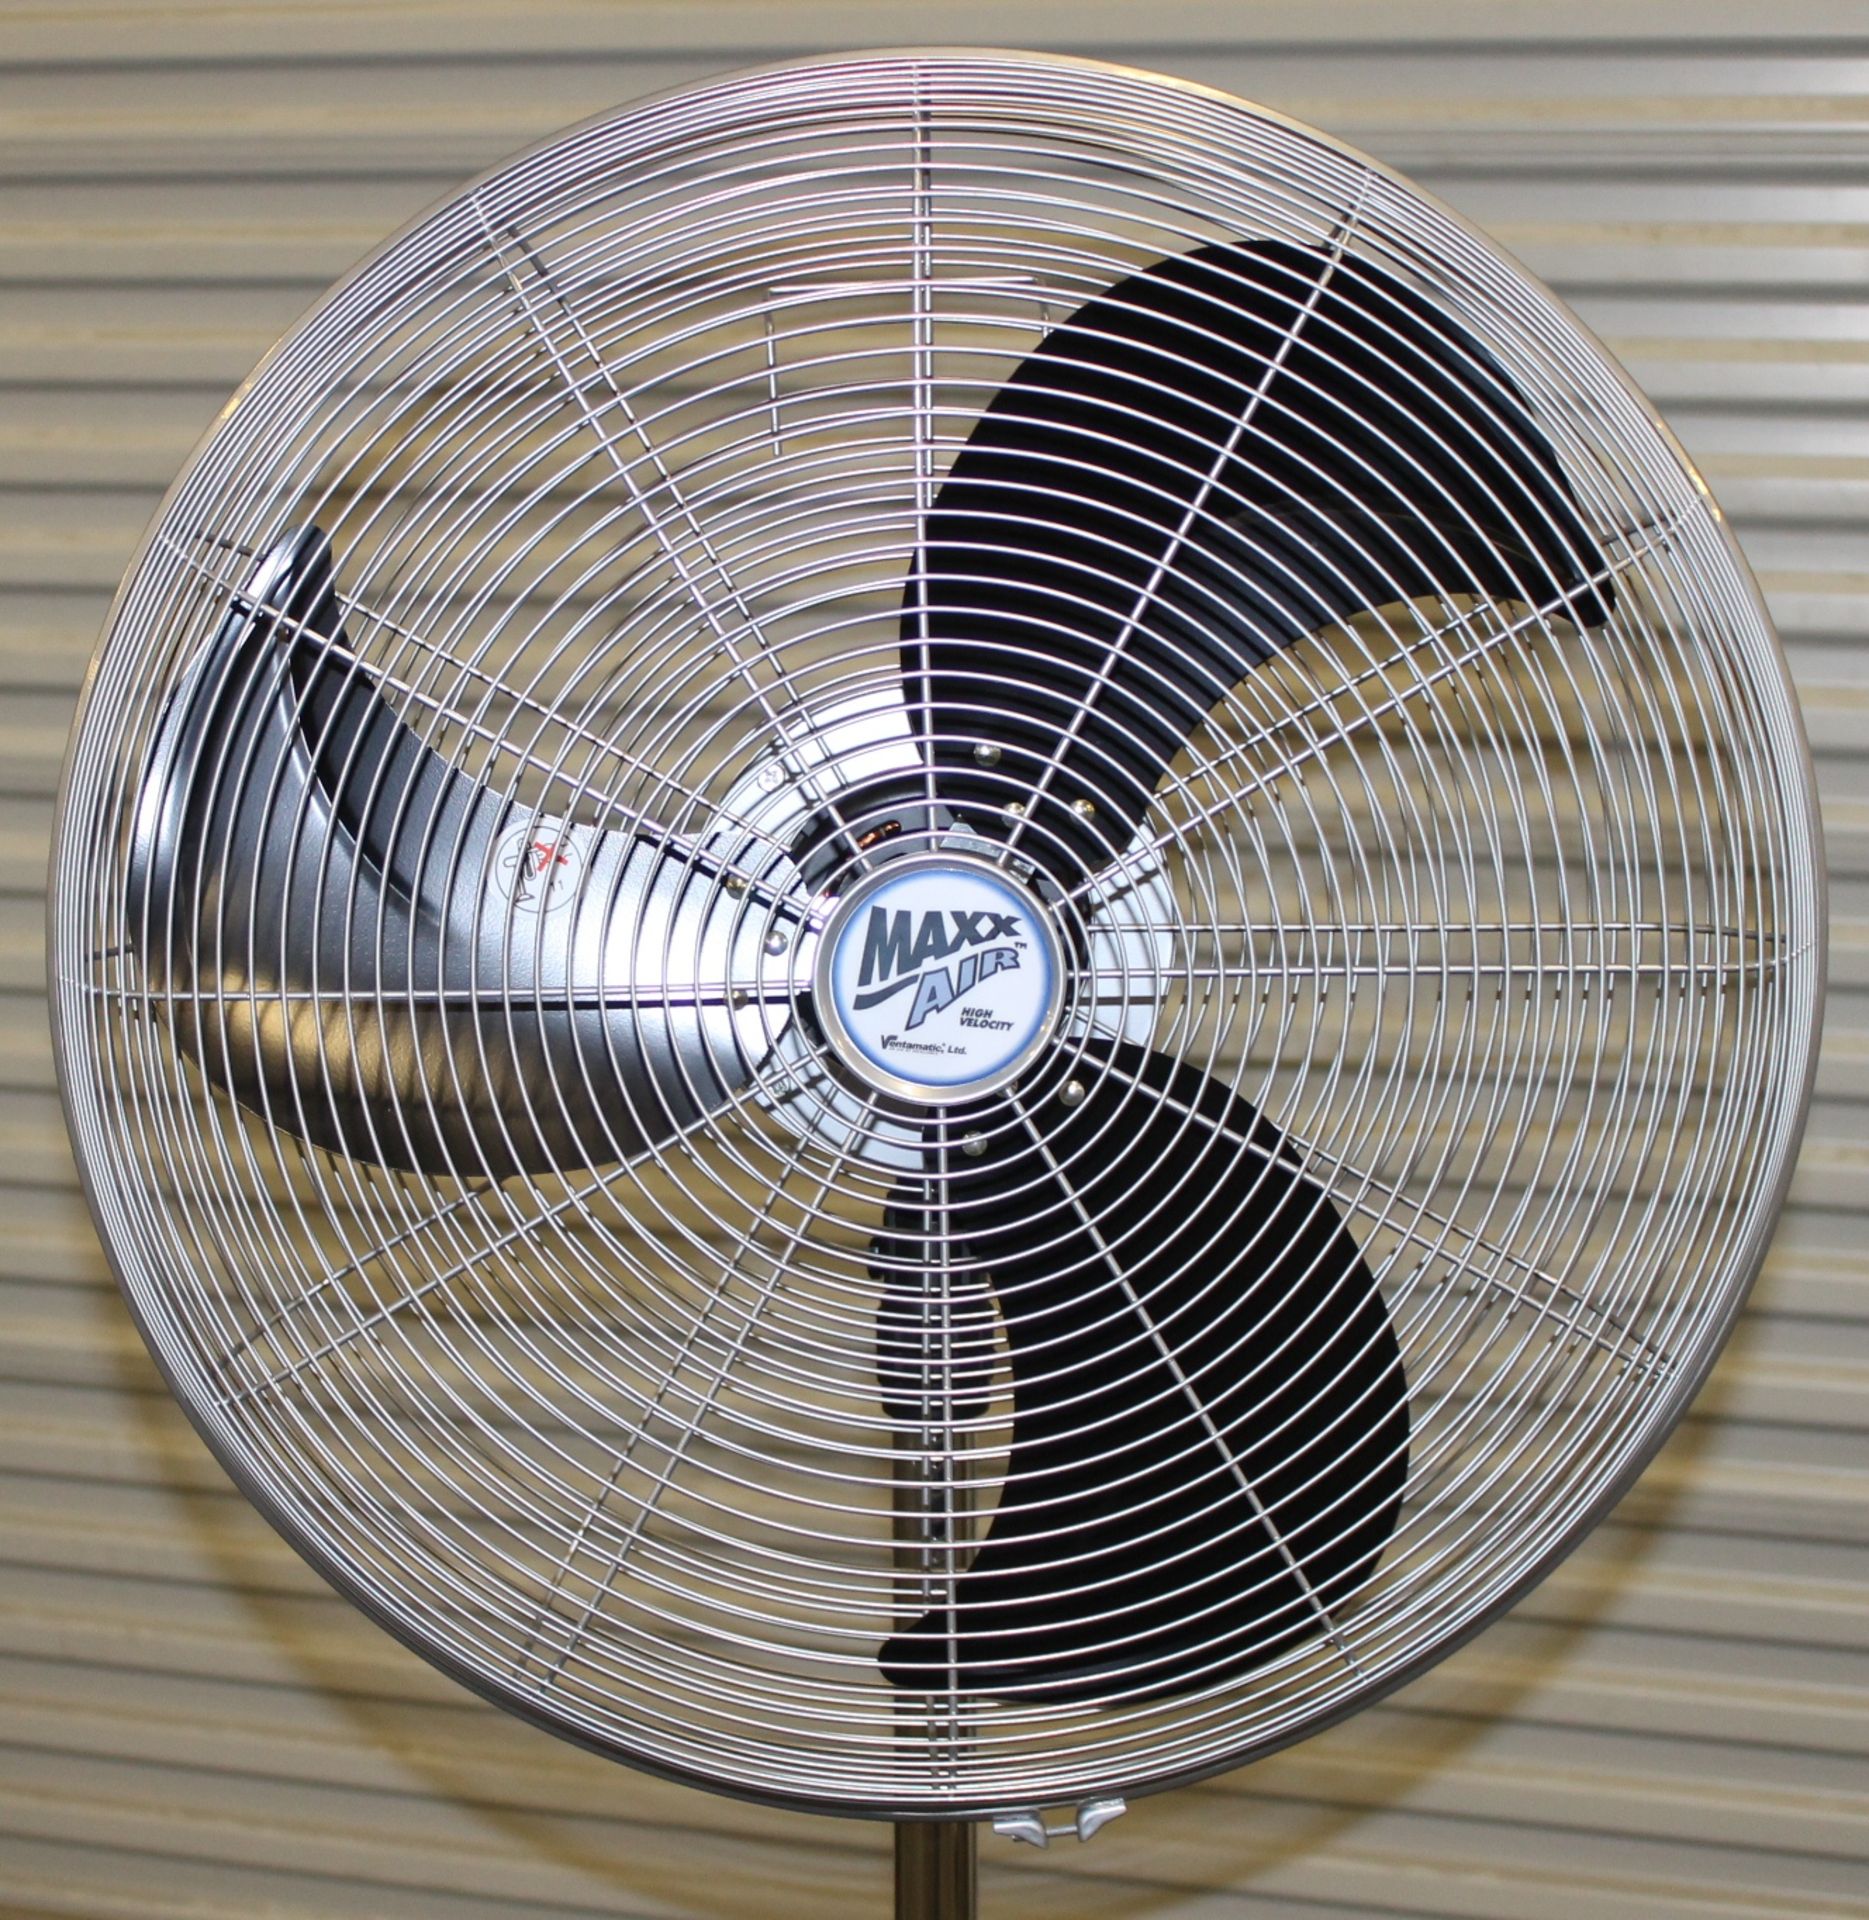 HIGH VELOCITY 22" OSCILLATING PEDESTAL FAN,  HEAVY DUTY 3-SPEED THERMALLY PROTECTED MOTOR, - Image 3 of 3